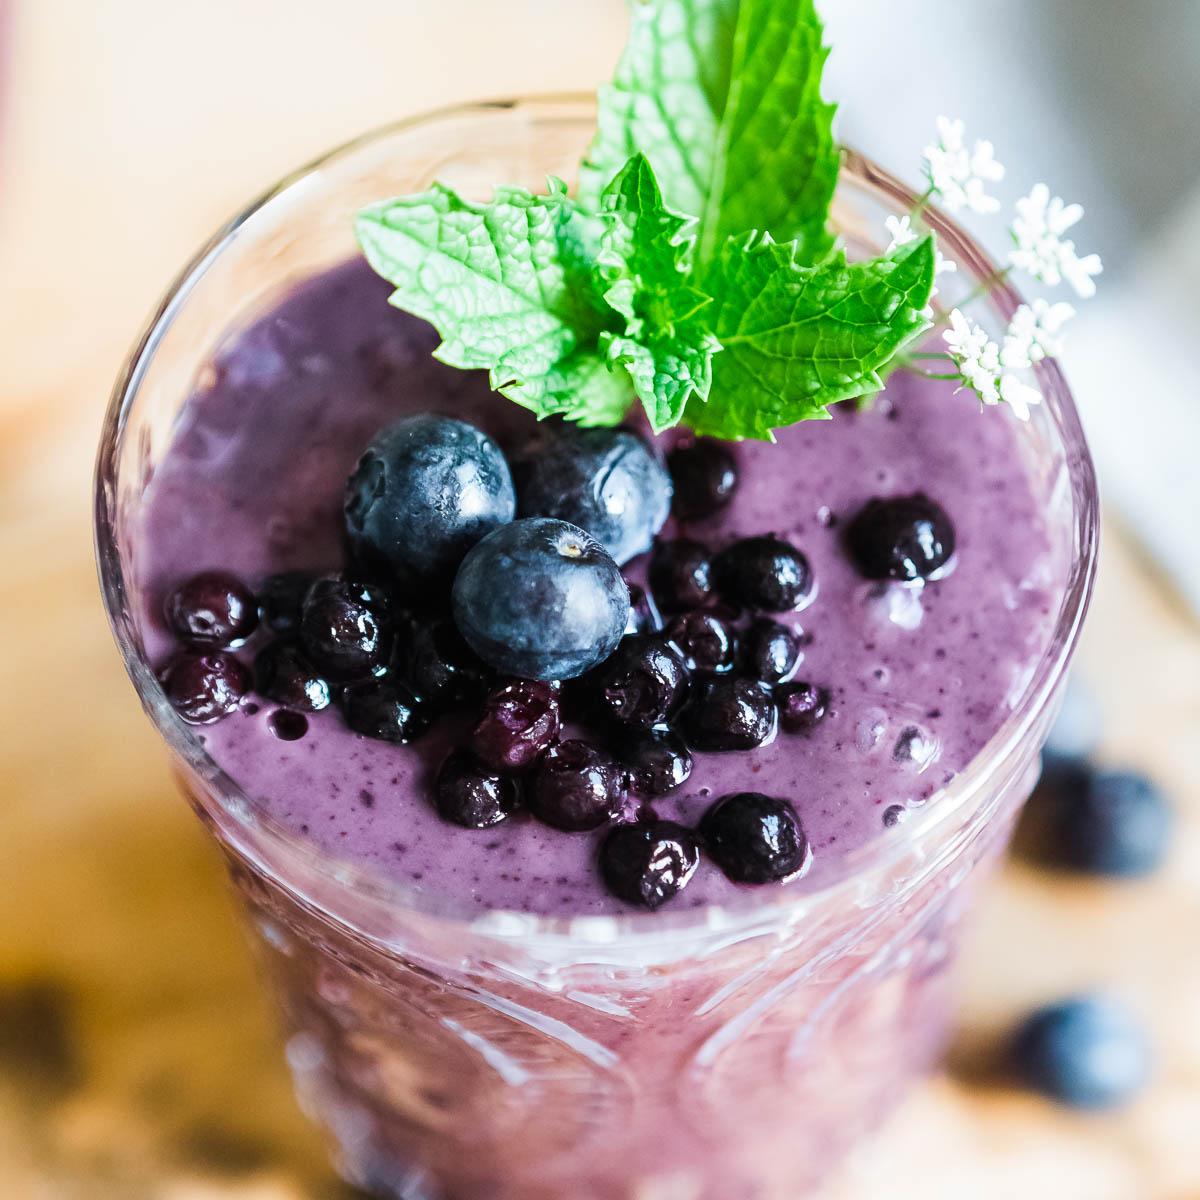 Blueberry Smoothie recipes included in this plant based meal plan